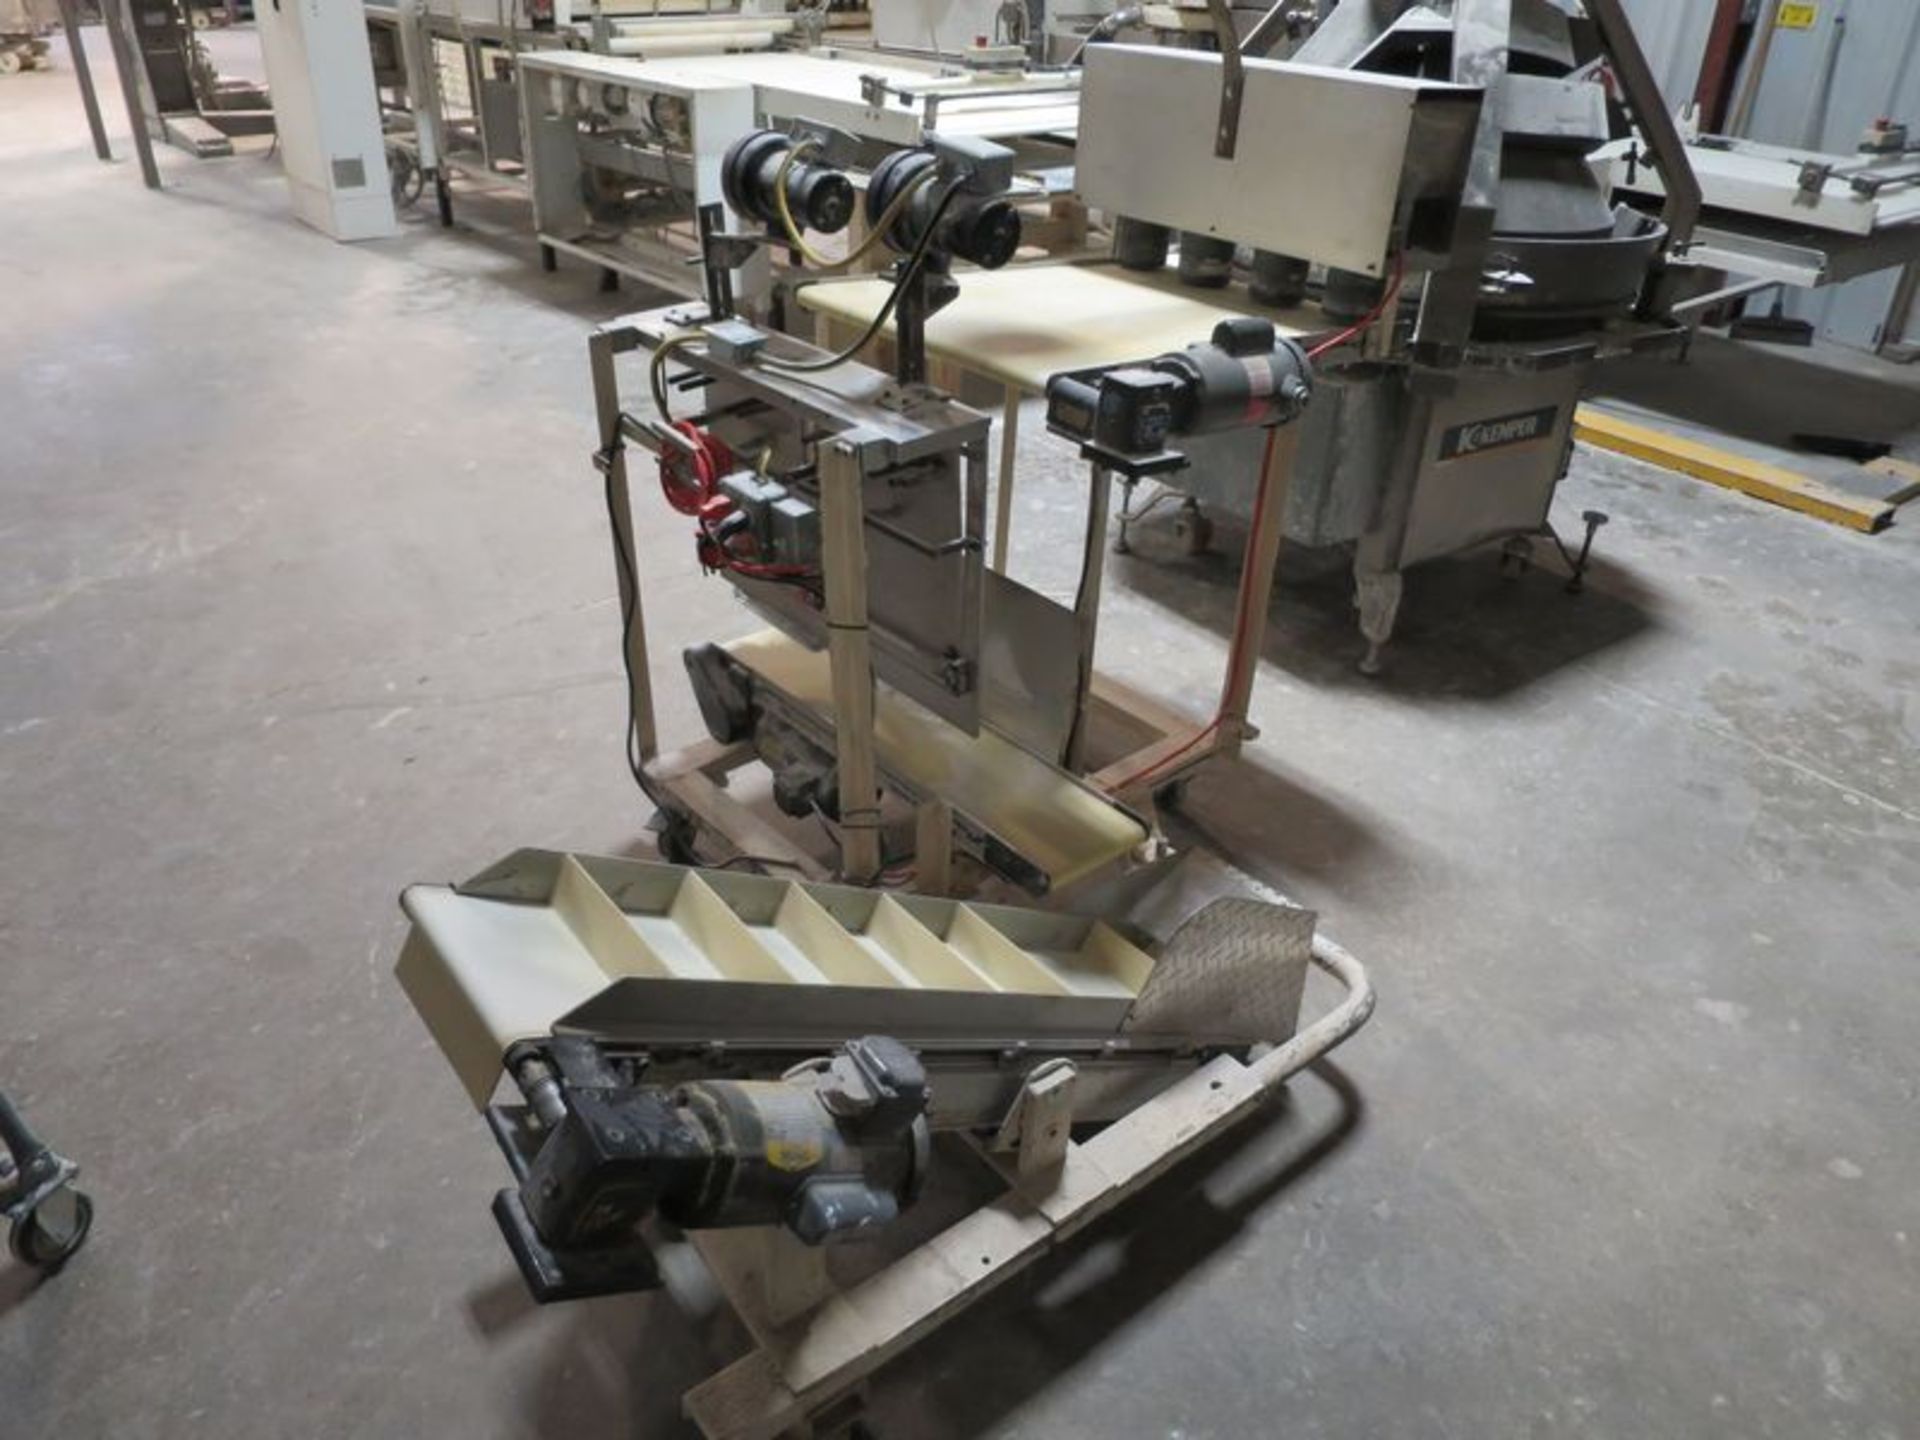 Semi automatic 4 position pizza dough bagger, with cleated belt discharge and mobile base - Image 3 of 3